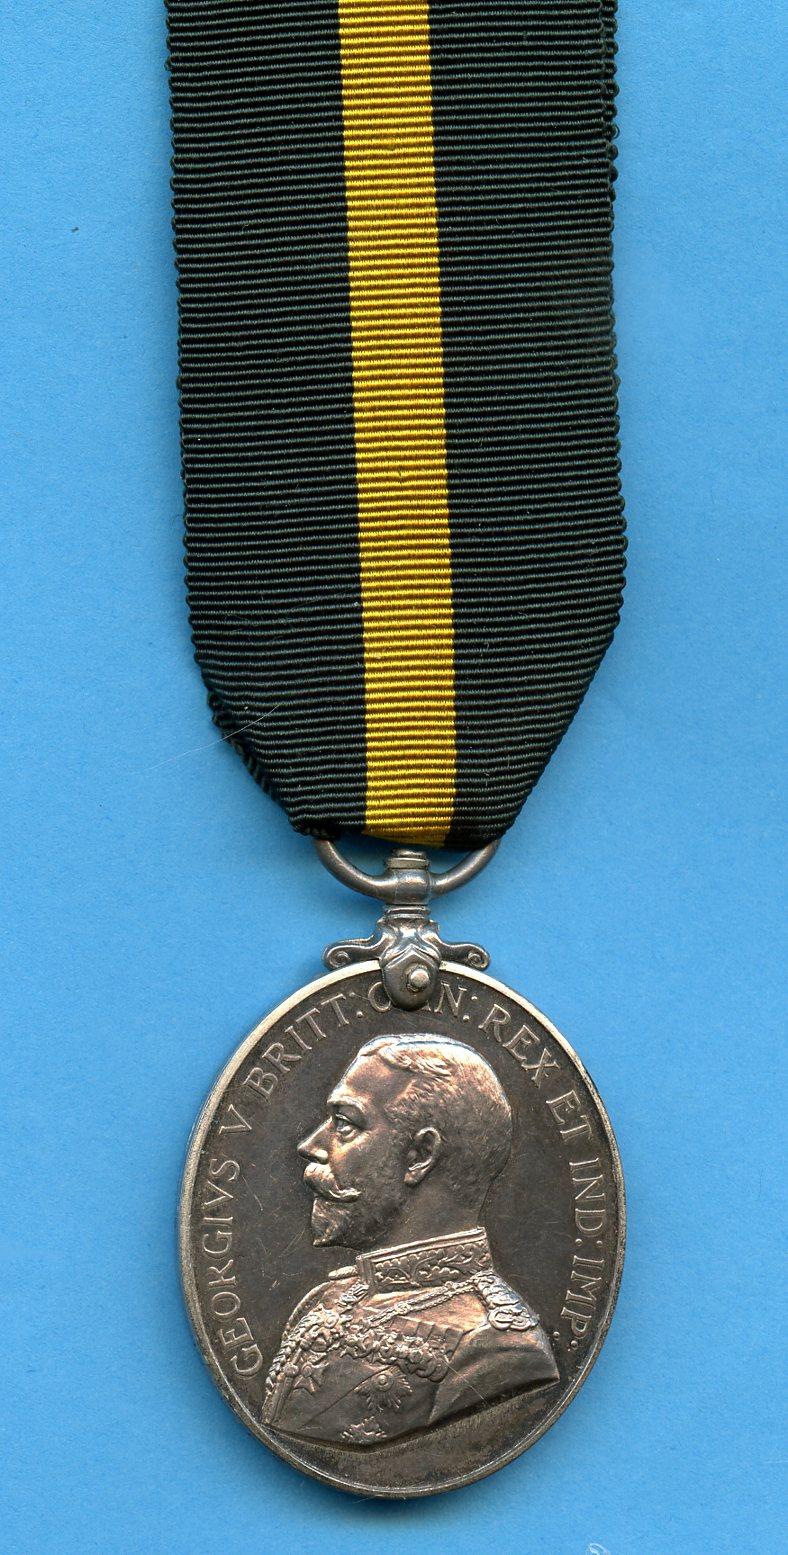 Territorial Force Efficiency Medal To Sjt J Ralston, Ayrshire Royal Field Artillery